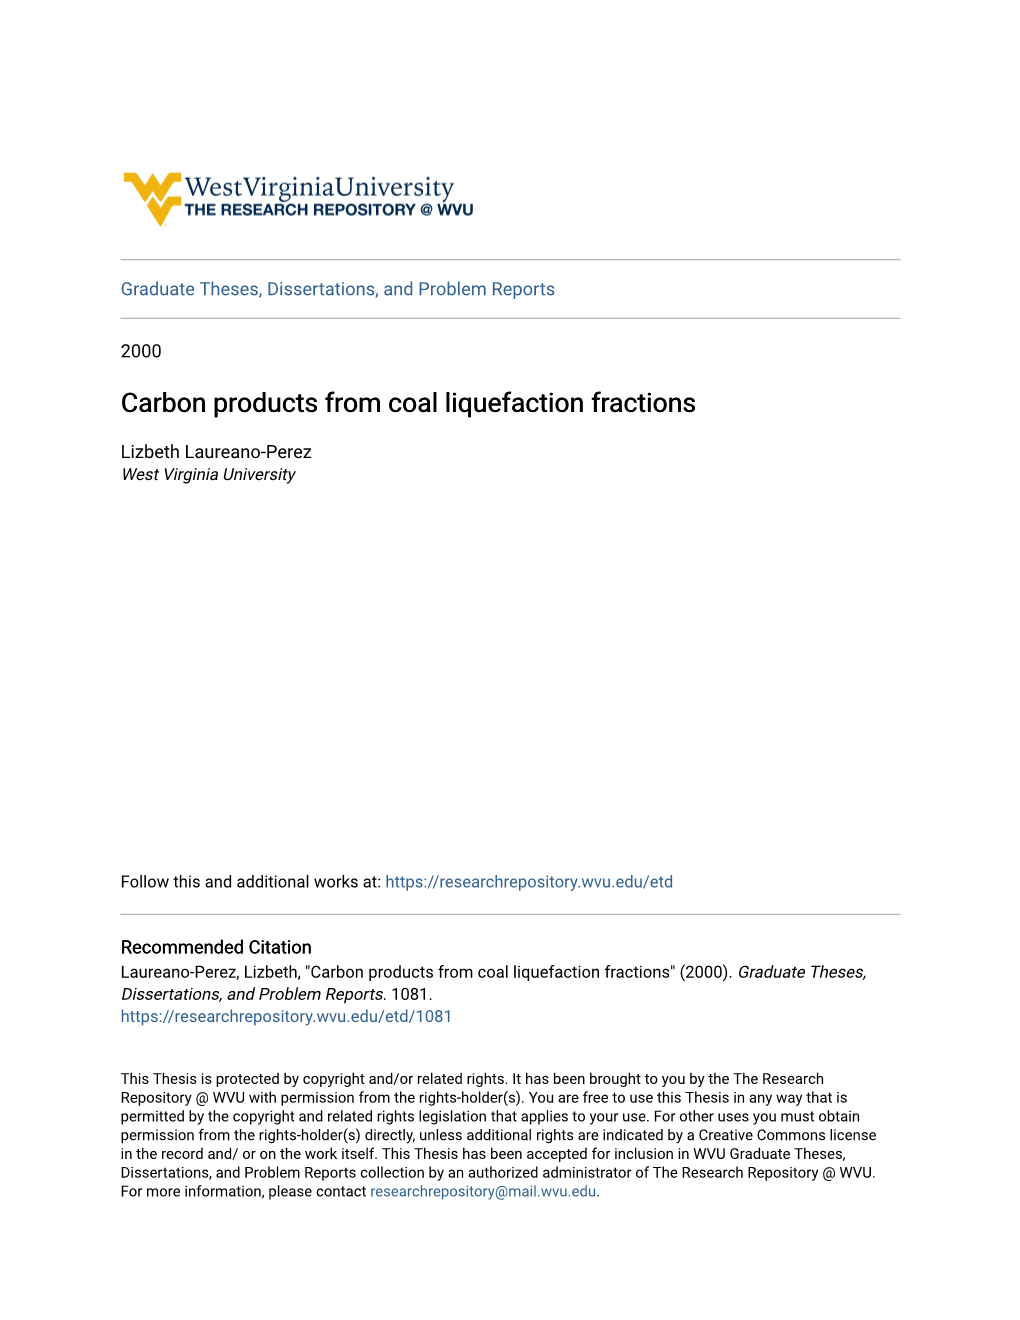 Carbon Products from Coal Liquefaction Fractions